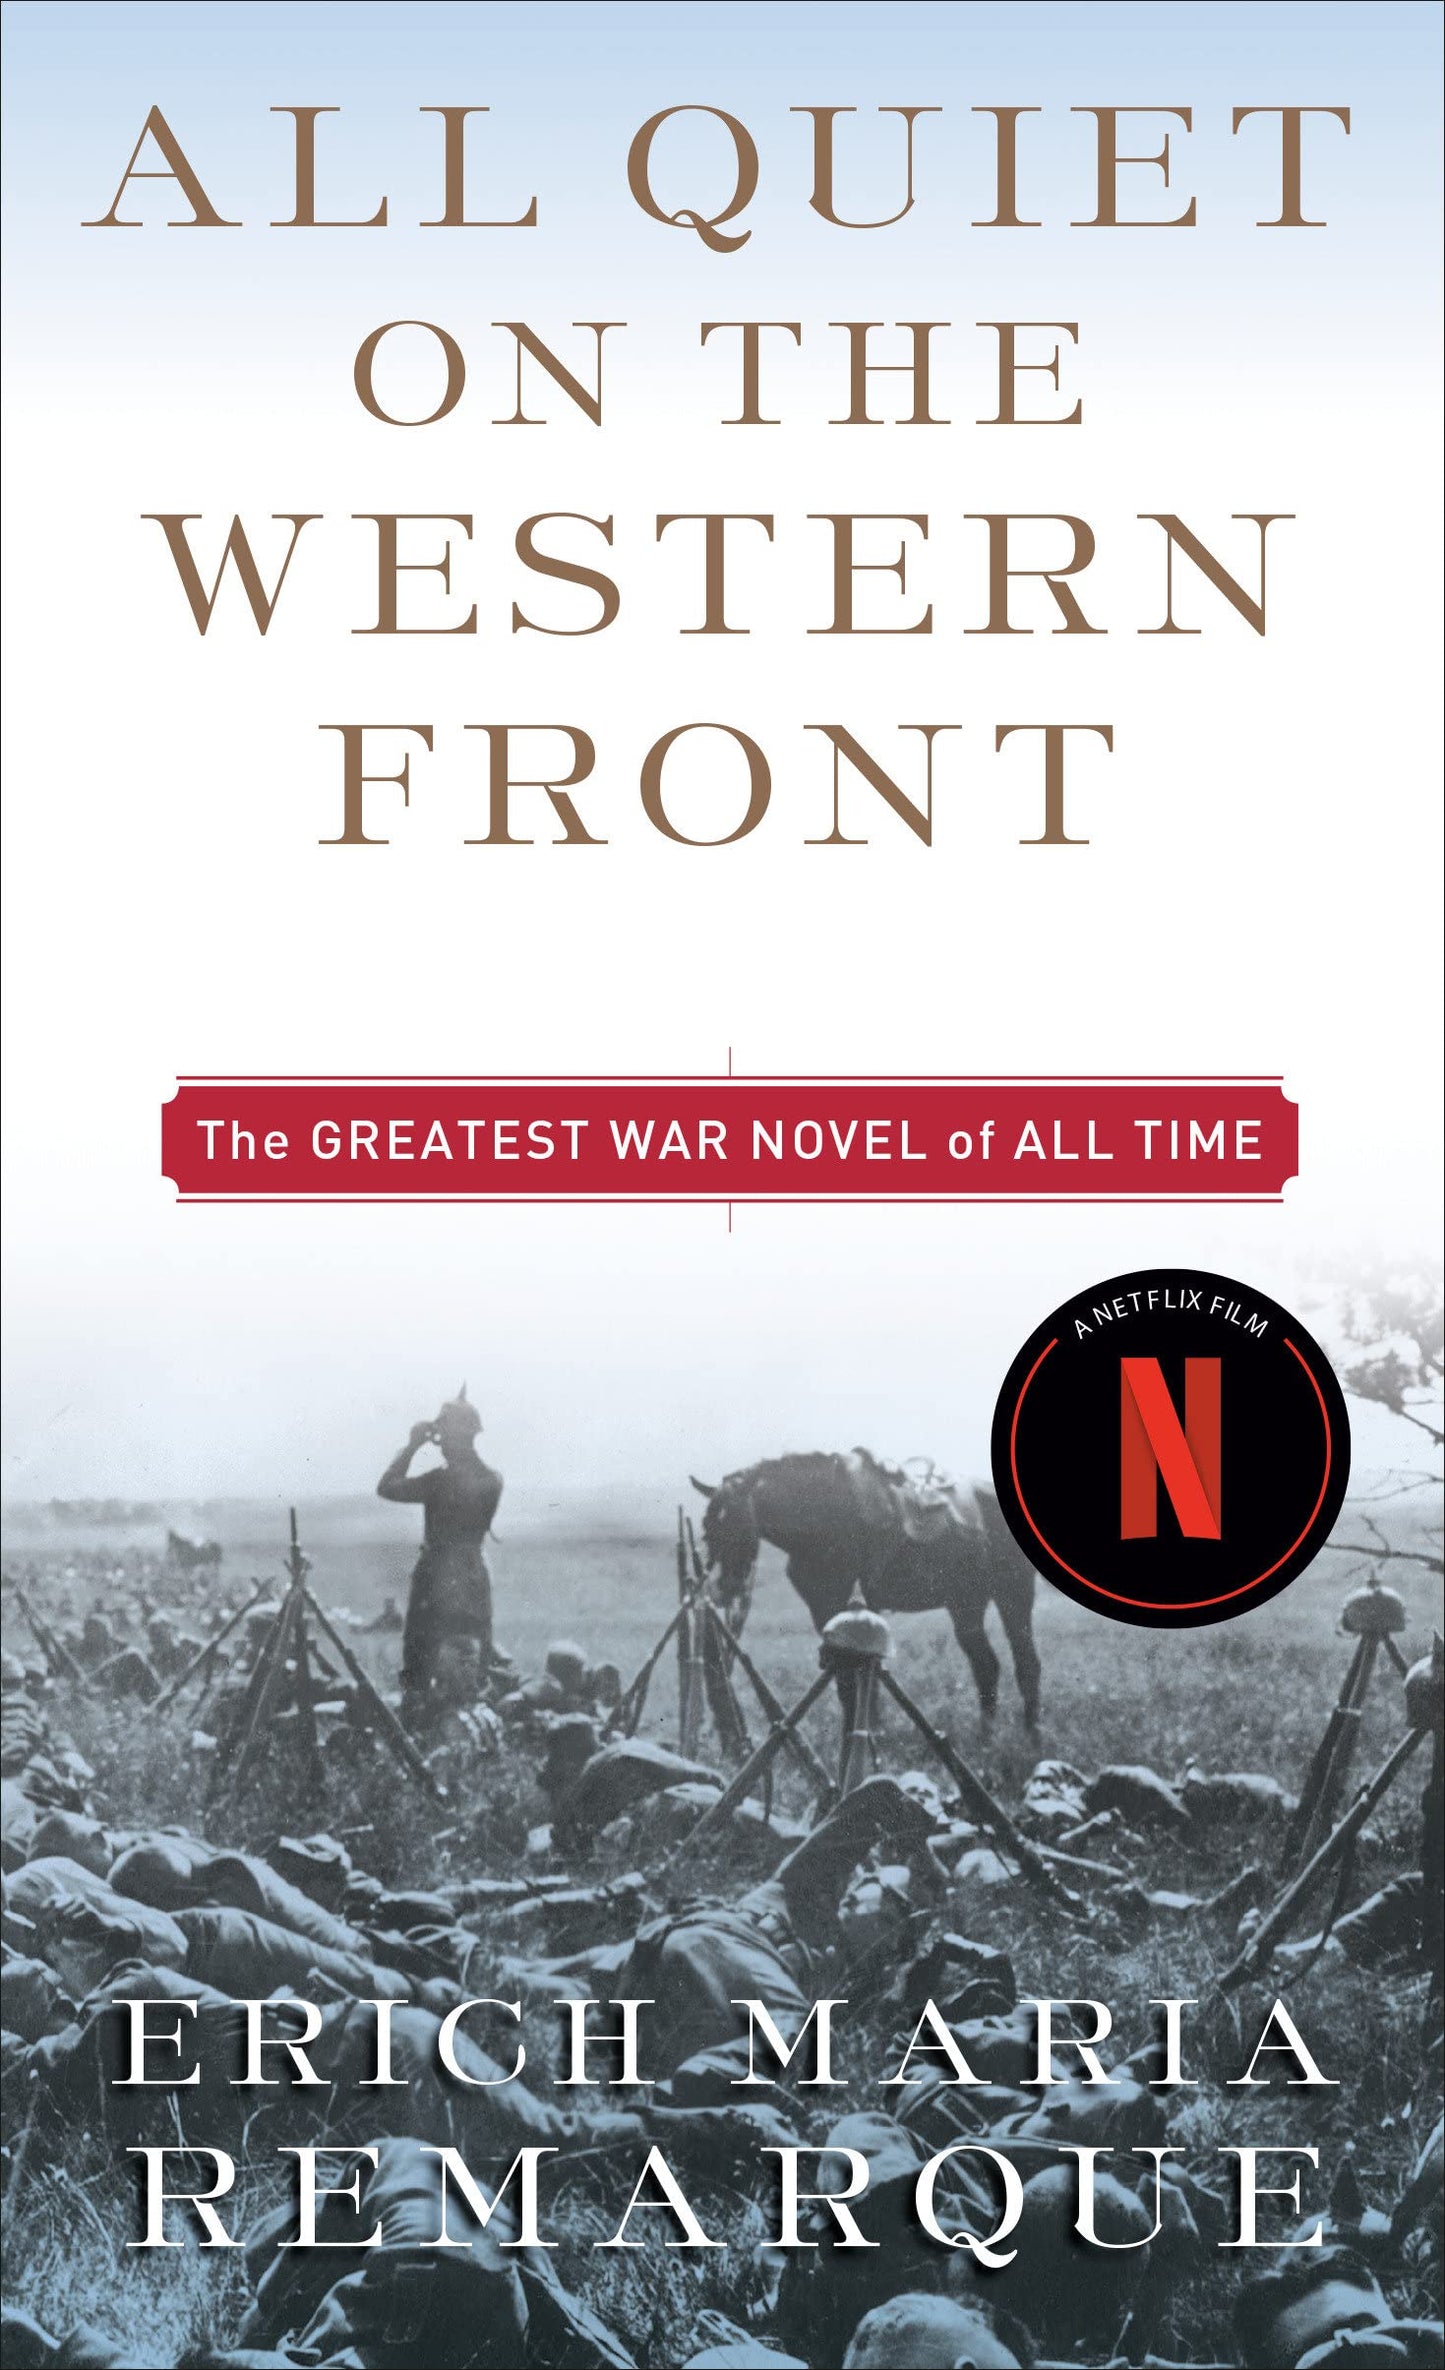 All Quiet on the Western Front, by Erich Maria Remarque